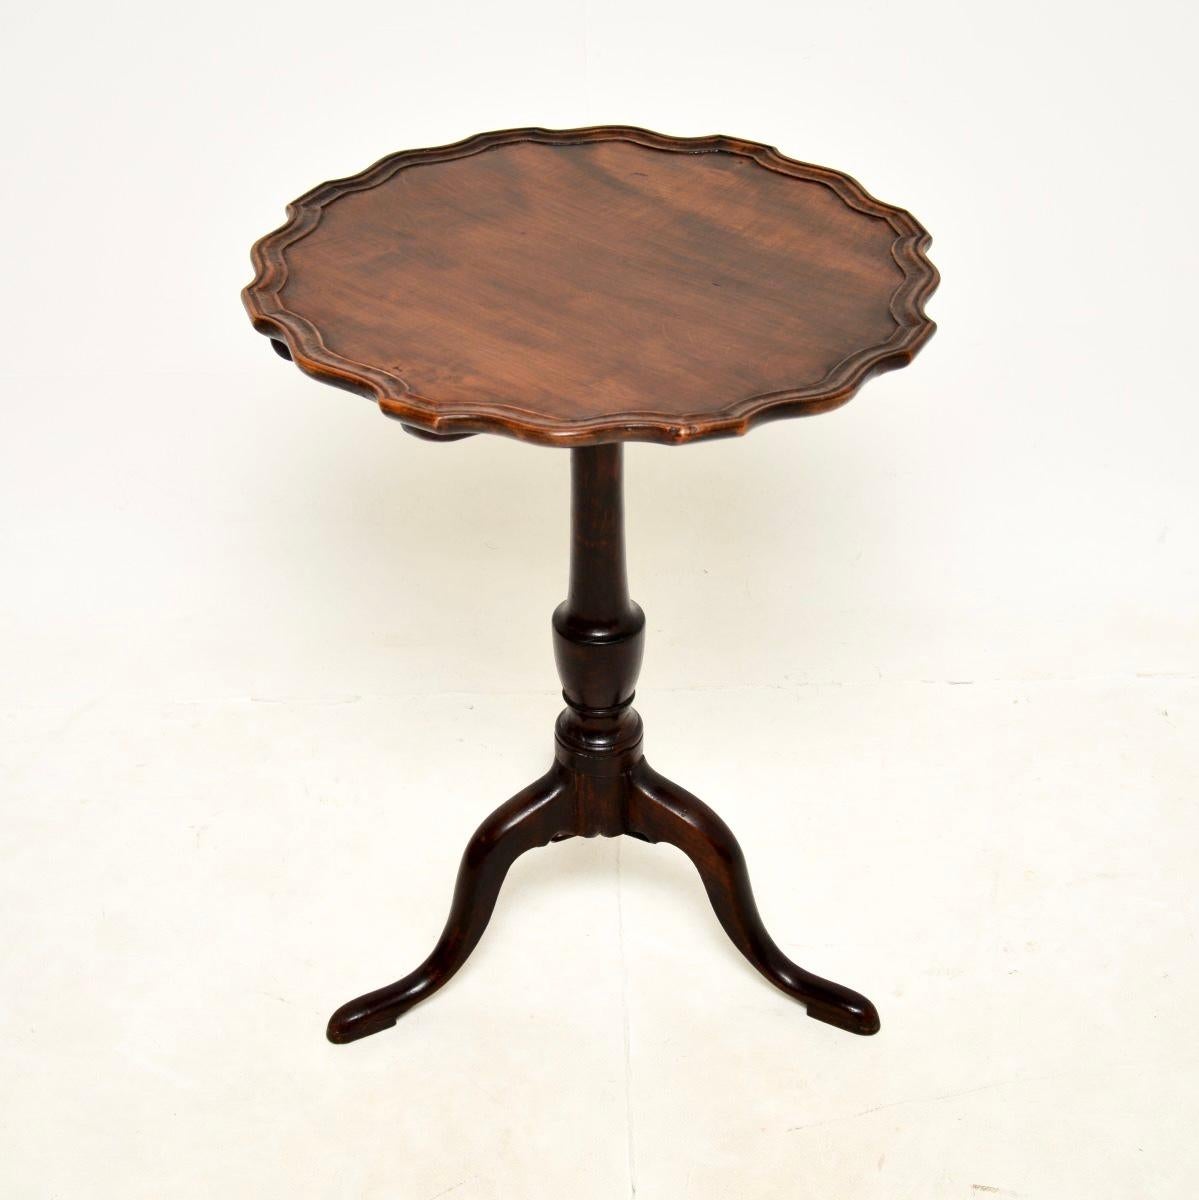 A charming and very well made antique Georgian tilt top occasional table. This was made in England, it dates from around the 1790-1810 period.

It is of very good quality, the top has a raised pie crust edge and can be flipped up by releasing a